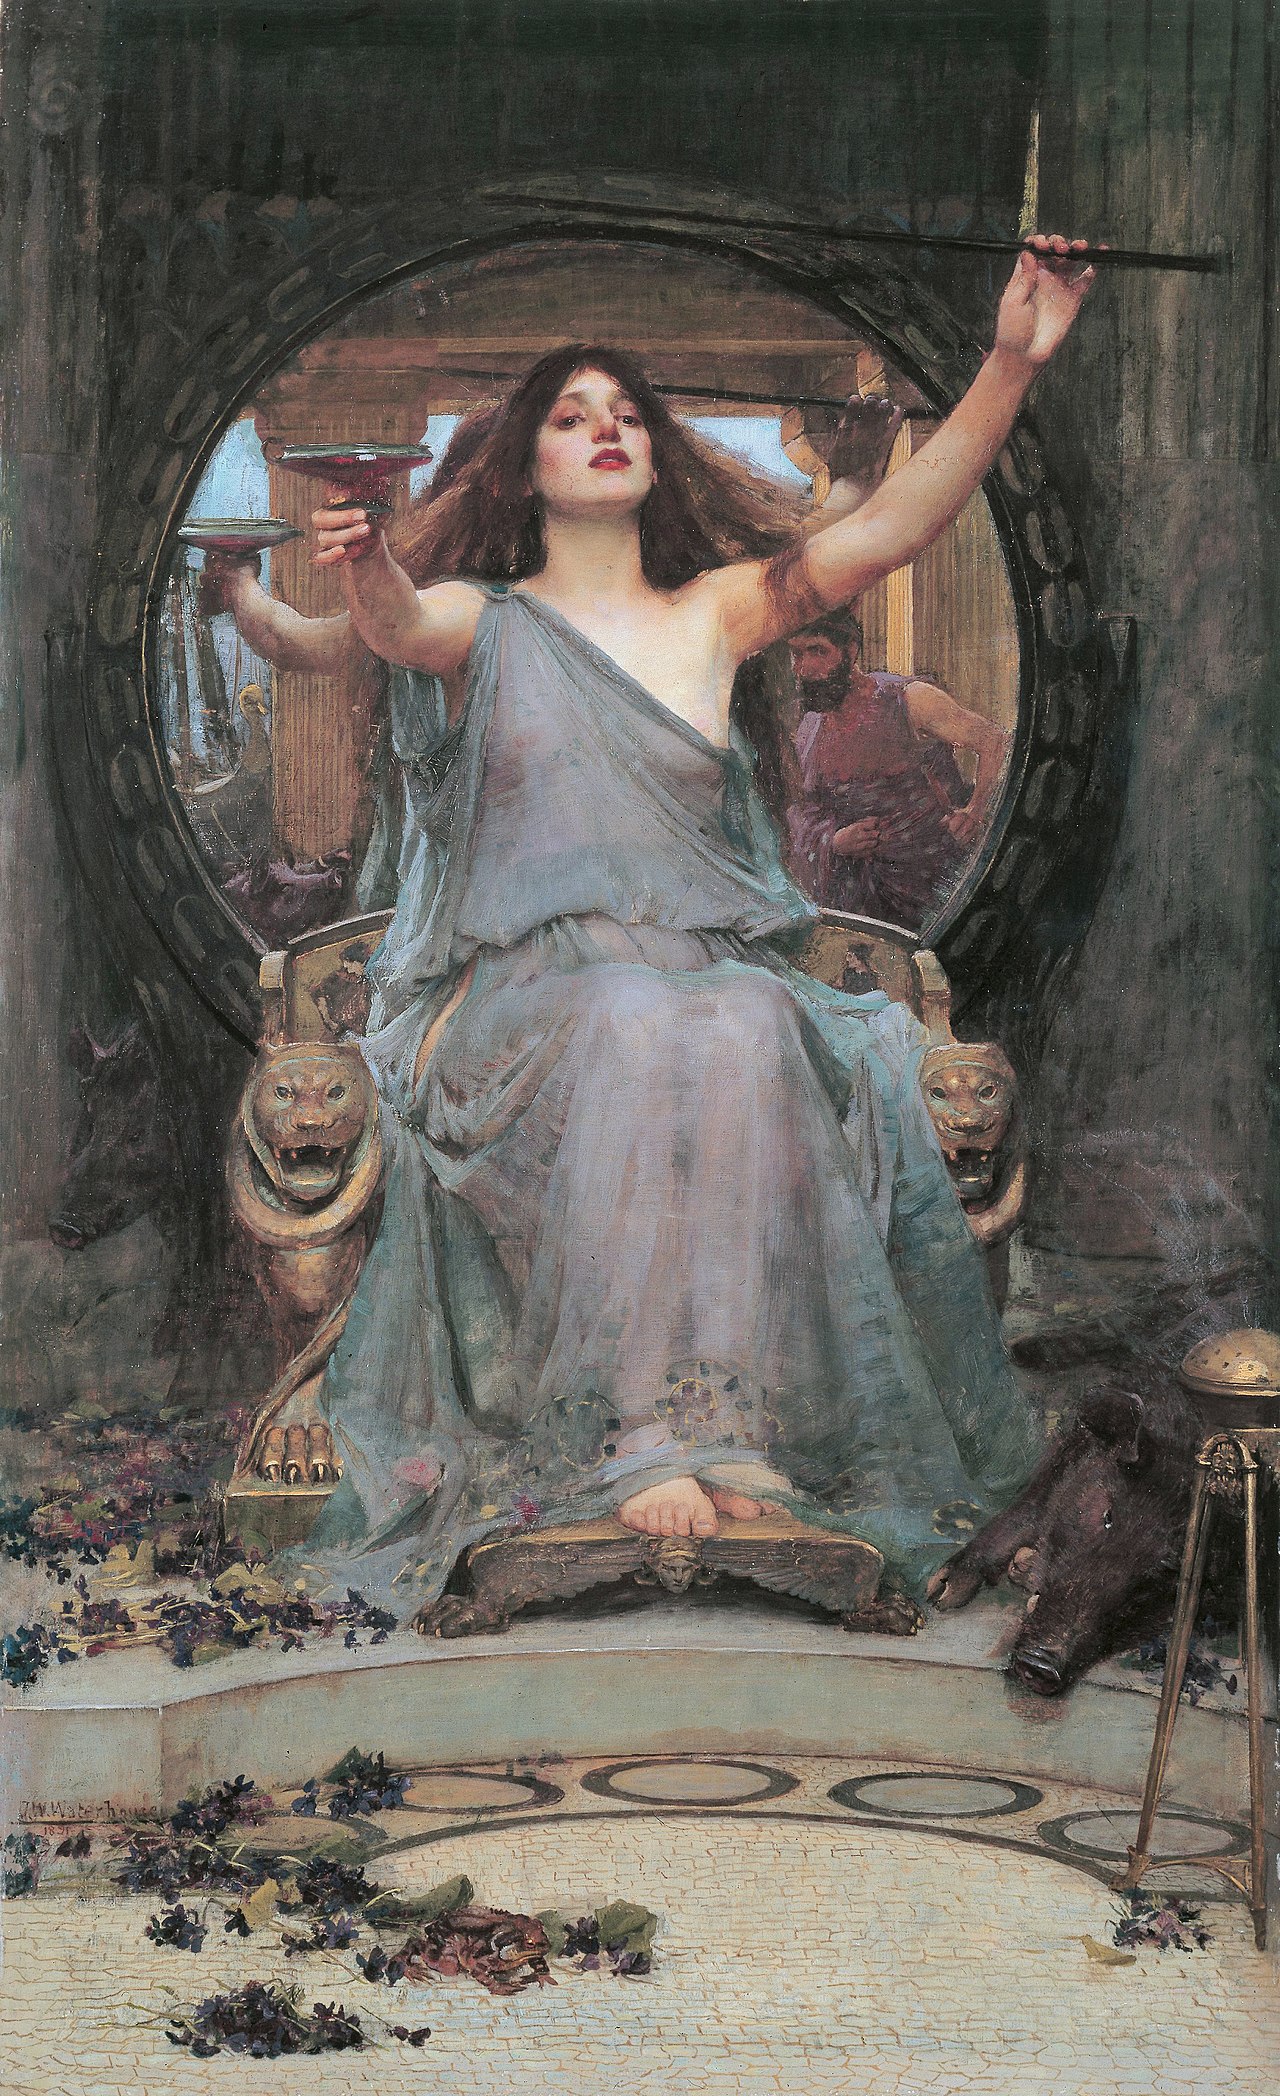 The original Circe Offering the Cup to Ulysses by John William Waterhouse